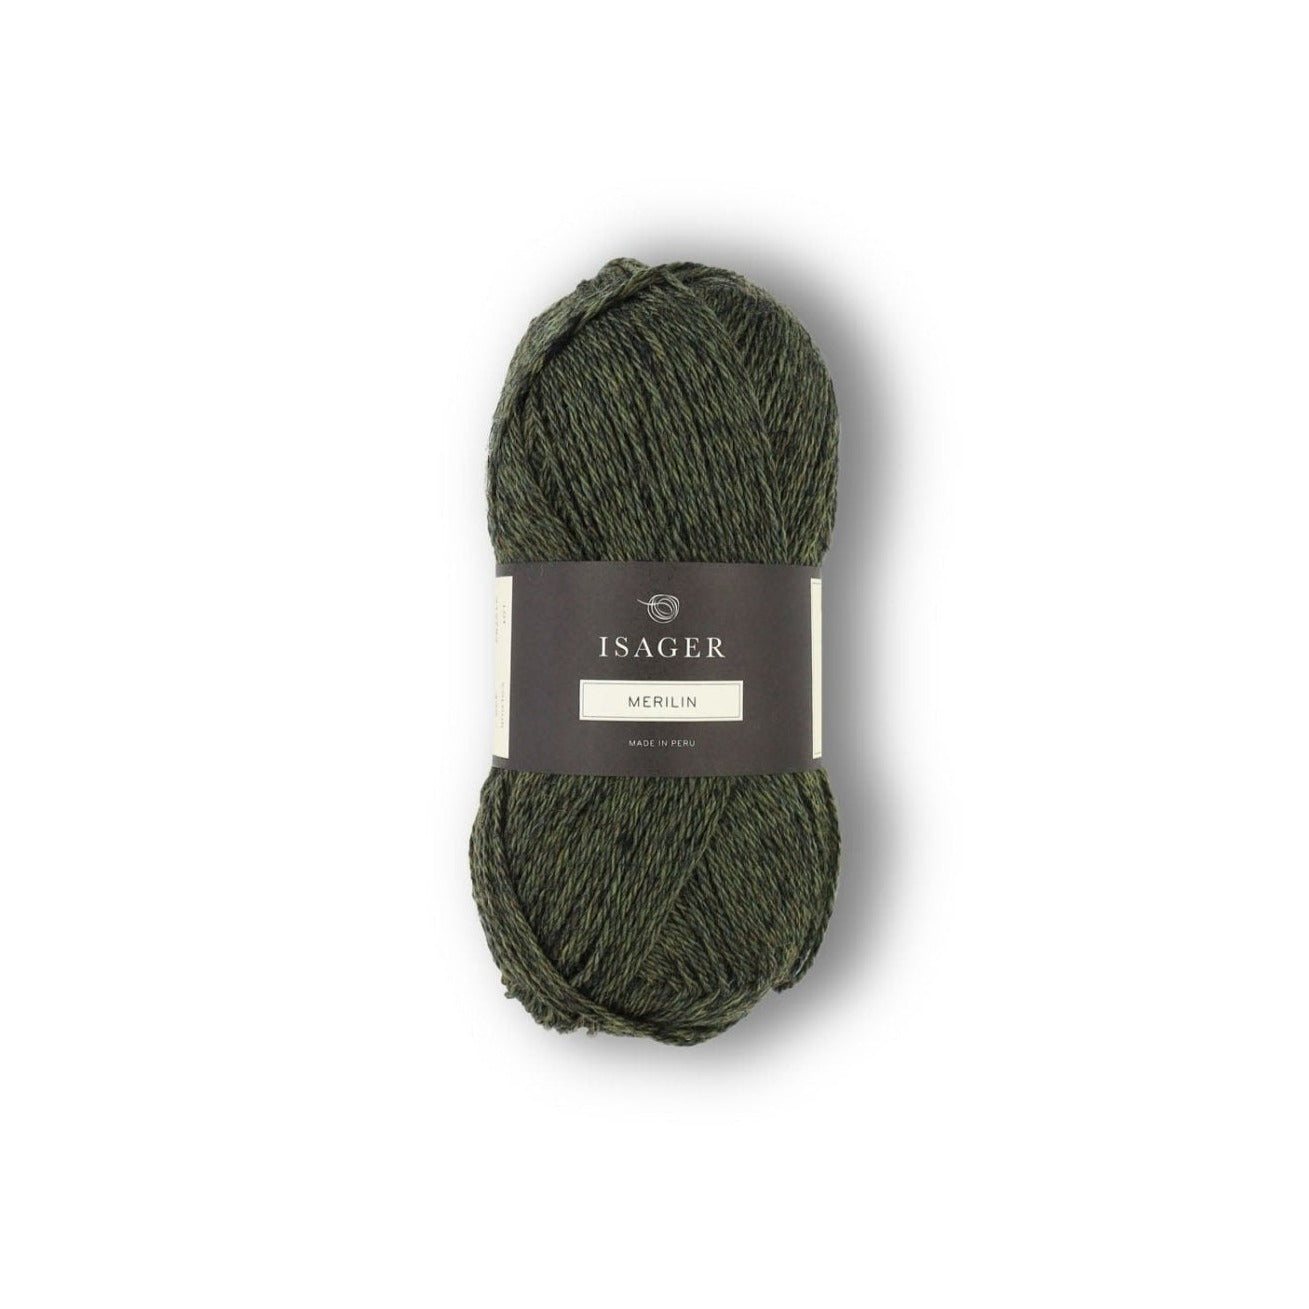 Isager Merilin - 43s - 3 Ply - Isager - The Little Yarn Store